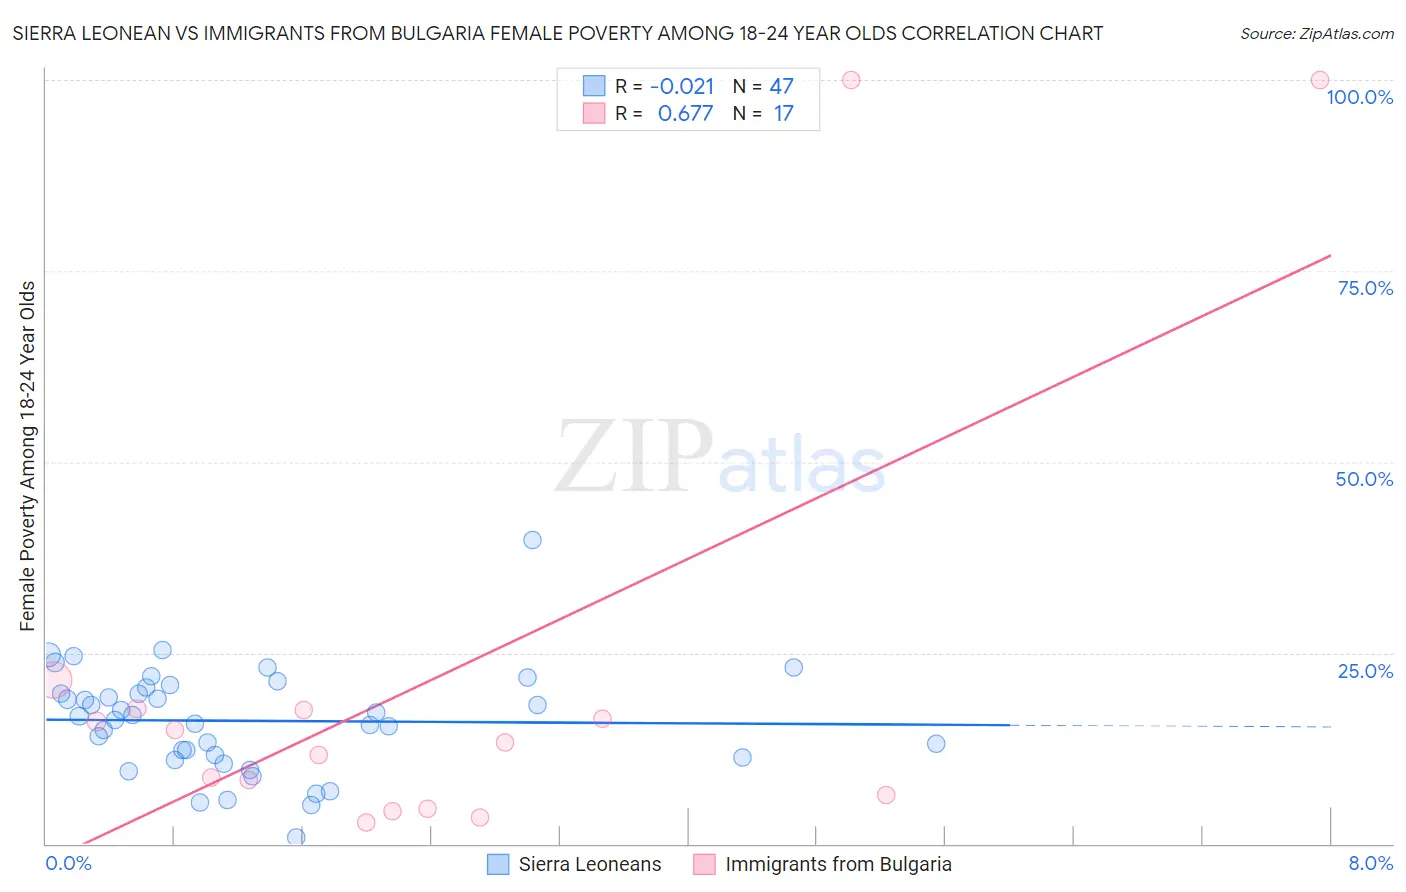 Sierra Leonean vs Immigrants from Bulgaria Female Poverty Among 18-24 Year Olds